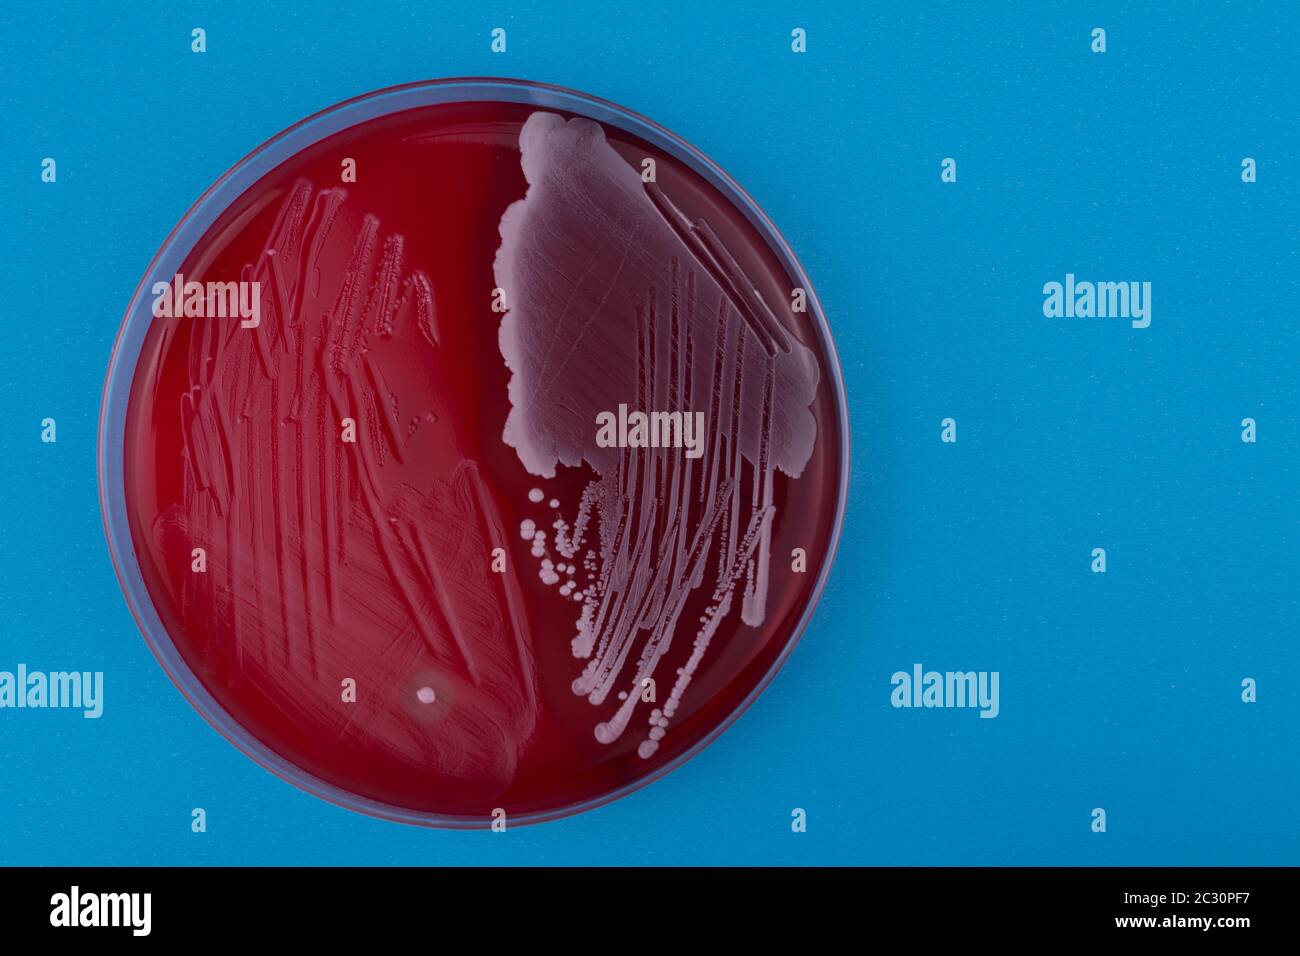 Petri dish with bacteria on blue background. Staphylococcus aureus and streptococcus beta-hemolytic bacteria on blood agar Stock Photo